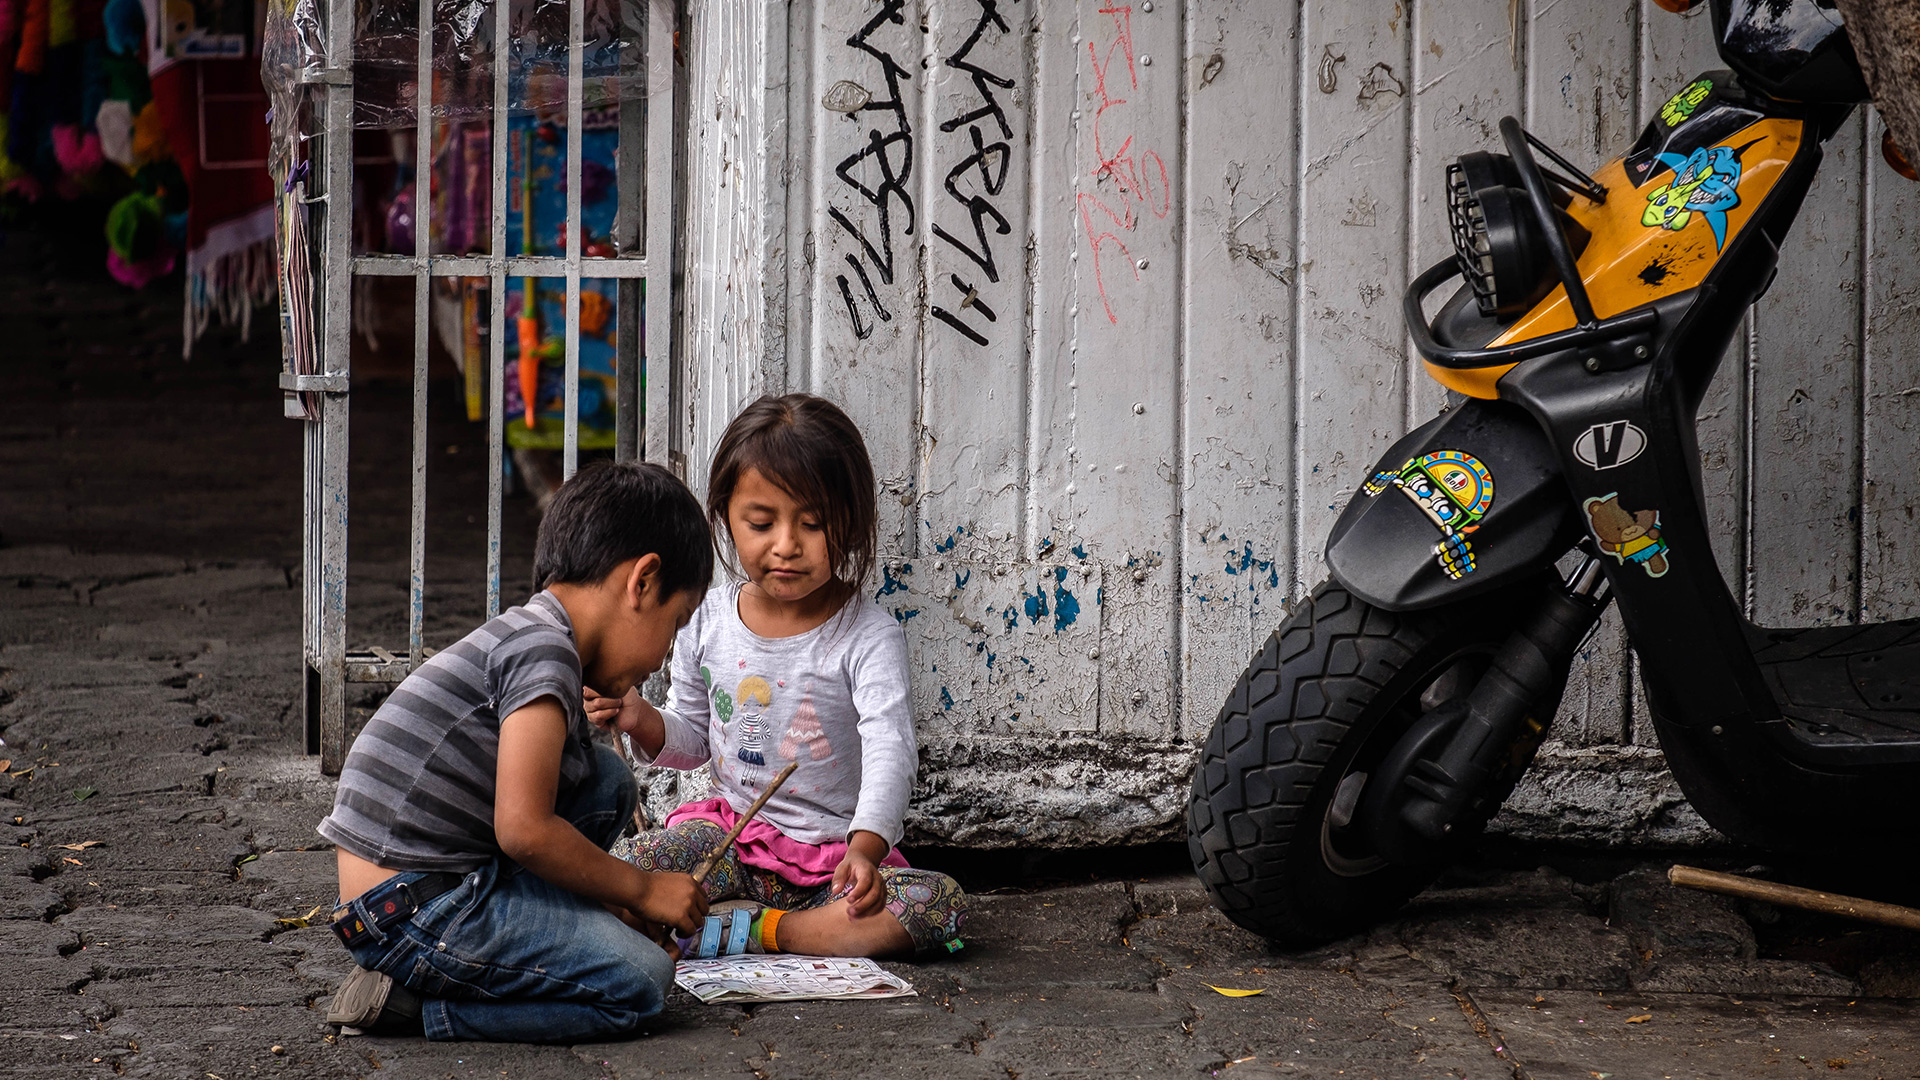 Children play in the streets of Mexico City